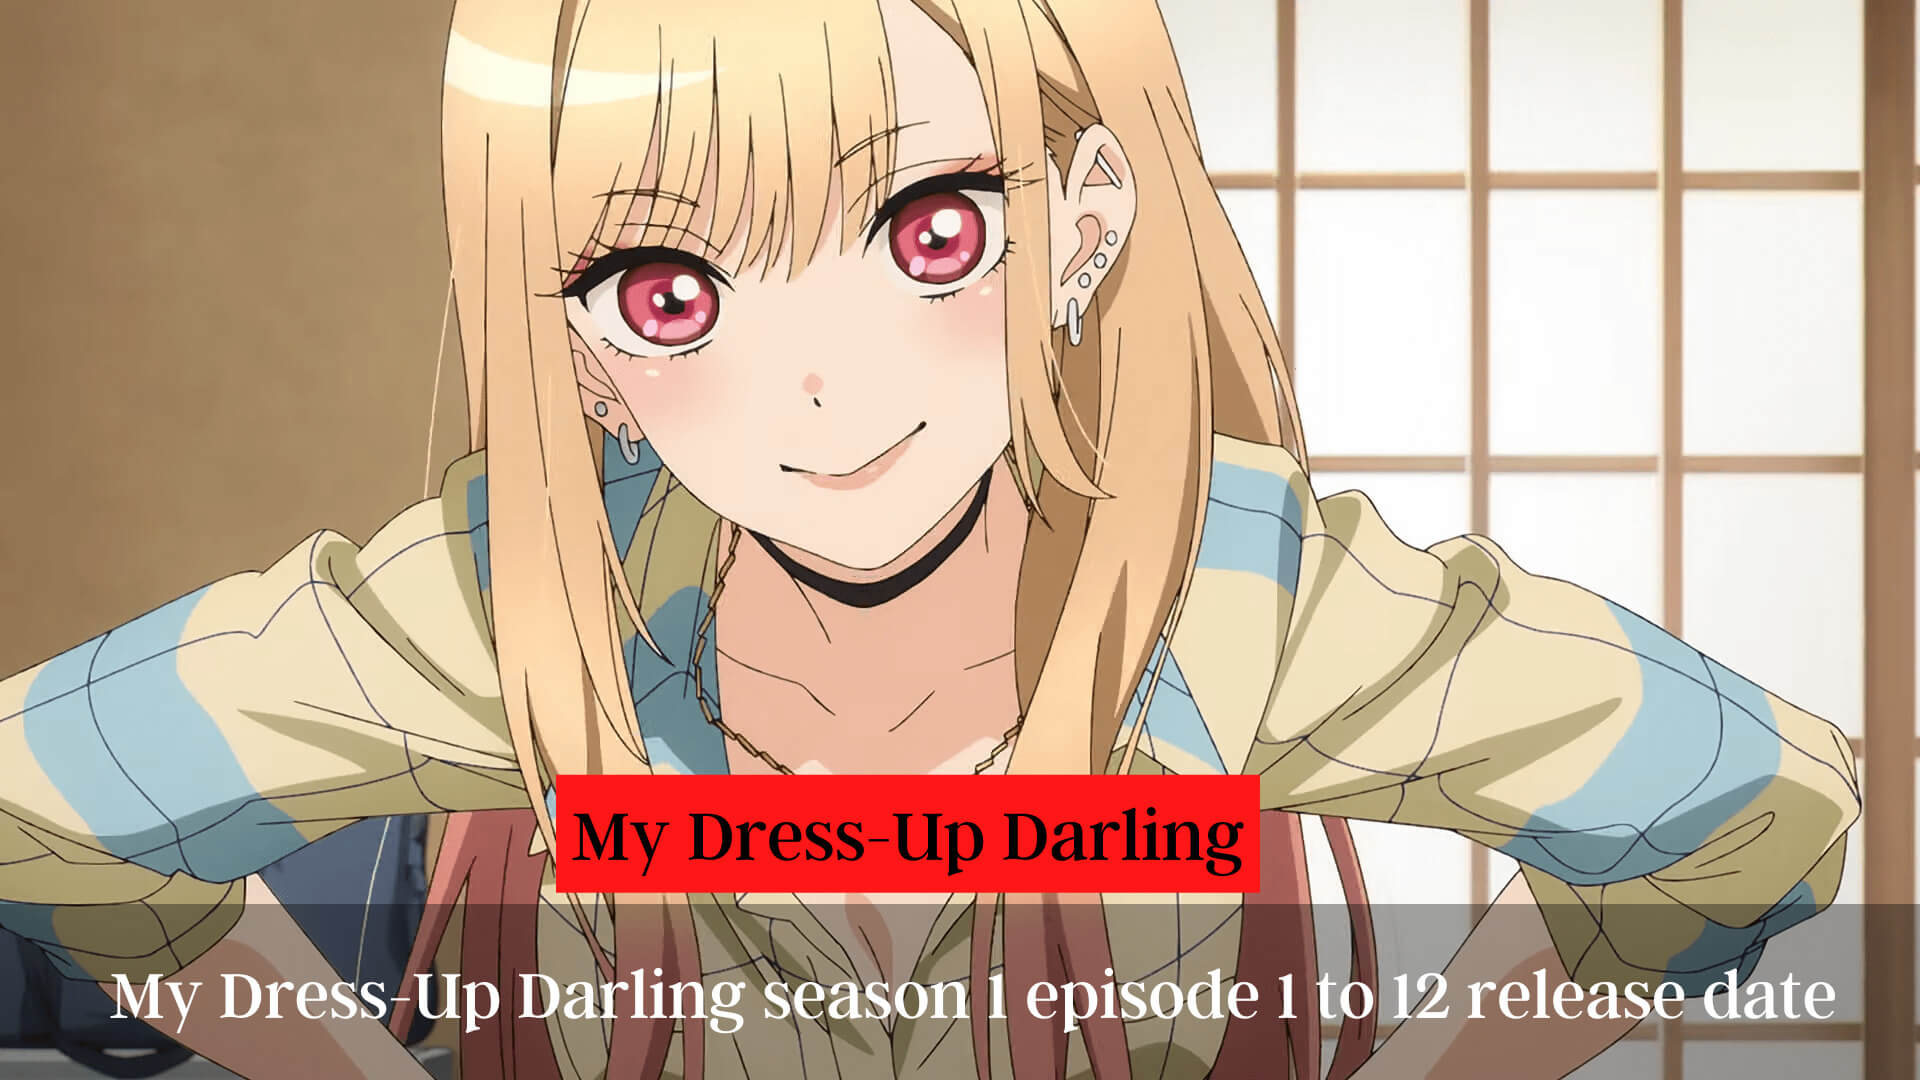 My Dress-Up Darling season 1 episode 1 to 12 release date